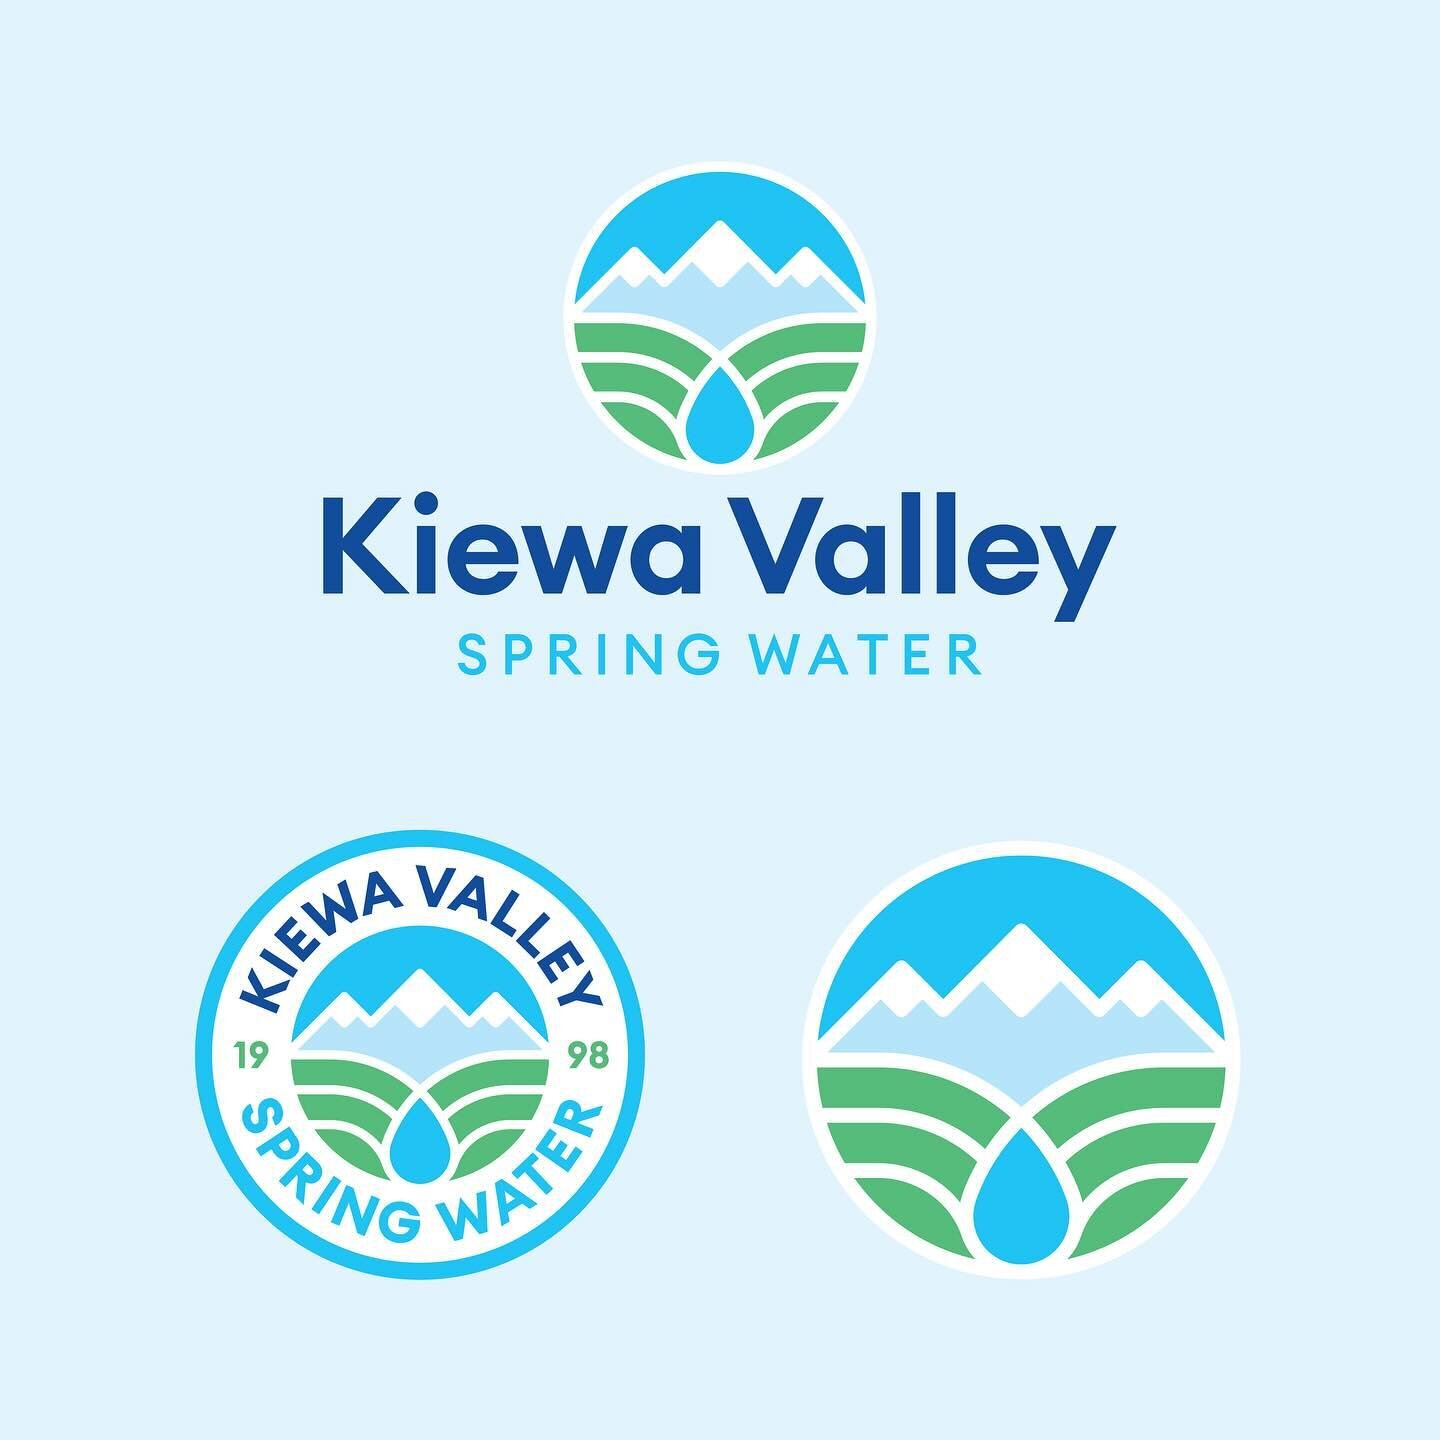 💦 Feeling a splash of excitement to share some of the fresh brand identity work for @kiewavalleyspring! Thanks to the legends on the Kiewa Valley team for your collaboration and trust!
&bull;
&bull;
&bull;
&bull;
&bull;
#brandidentity #graphicdesign